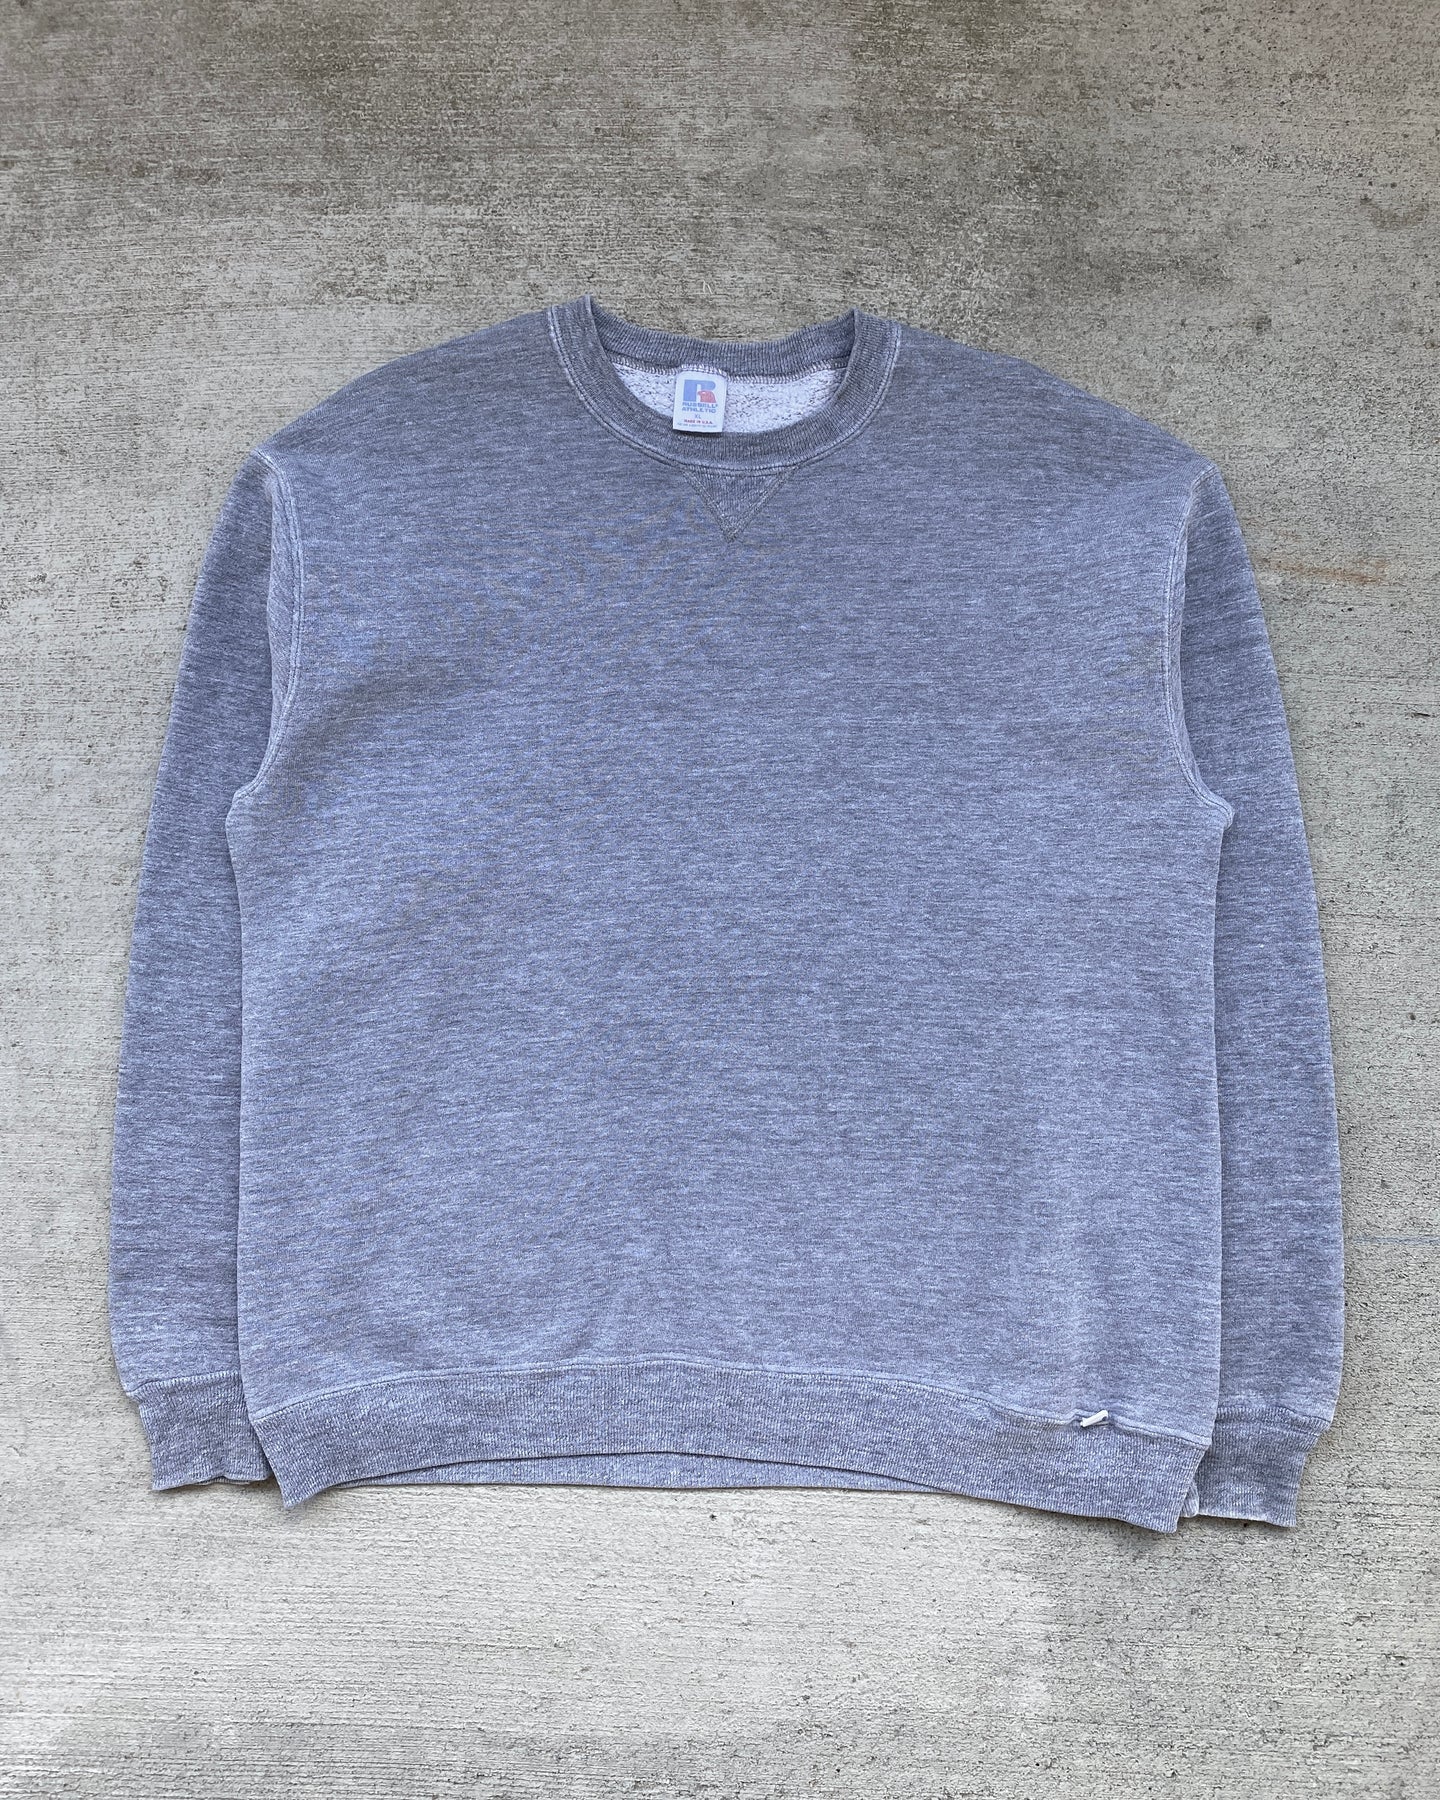 1980s Russell Athletic Heather Grey Blank Crewneck - Size Large